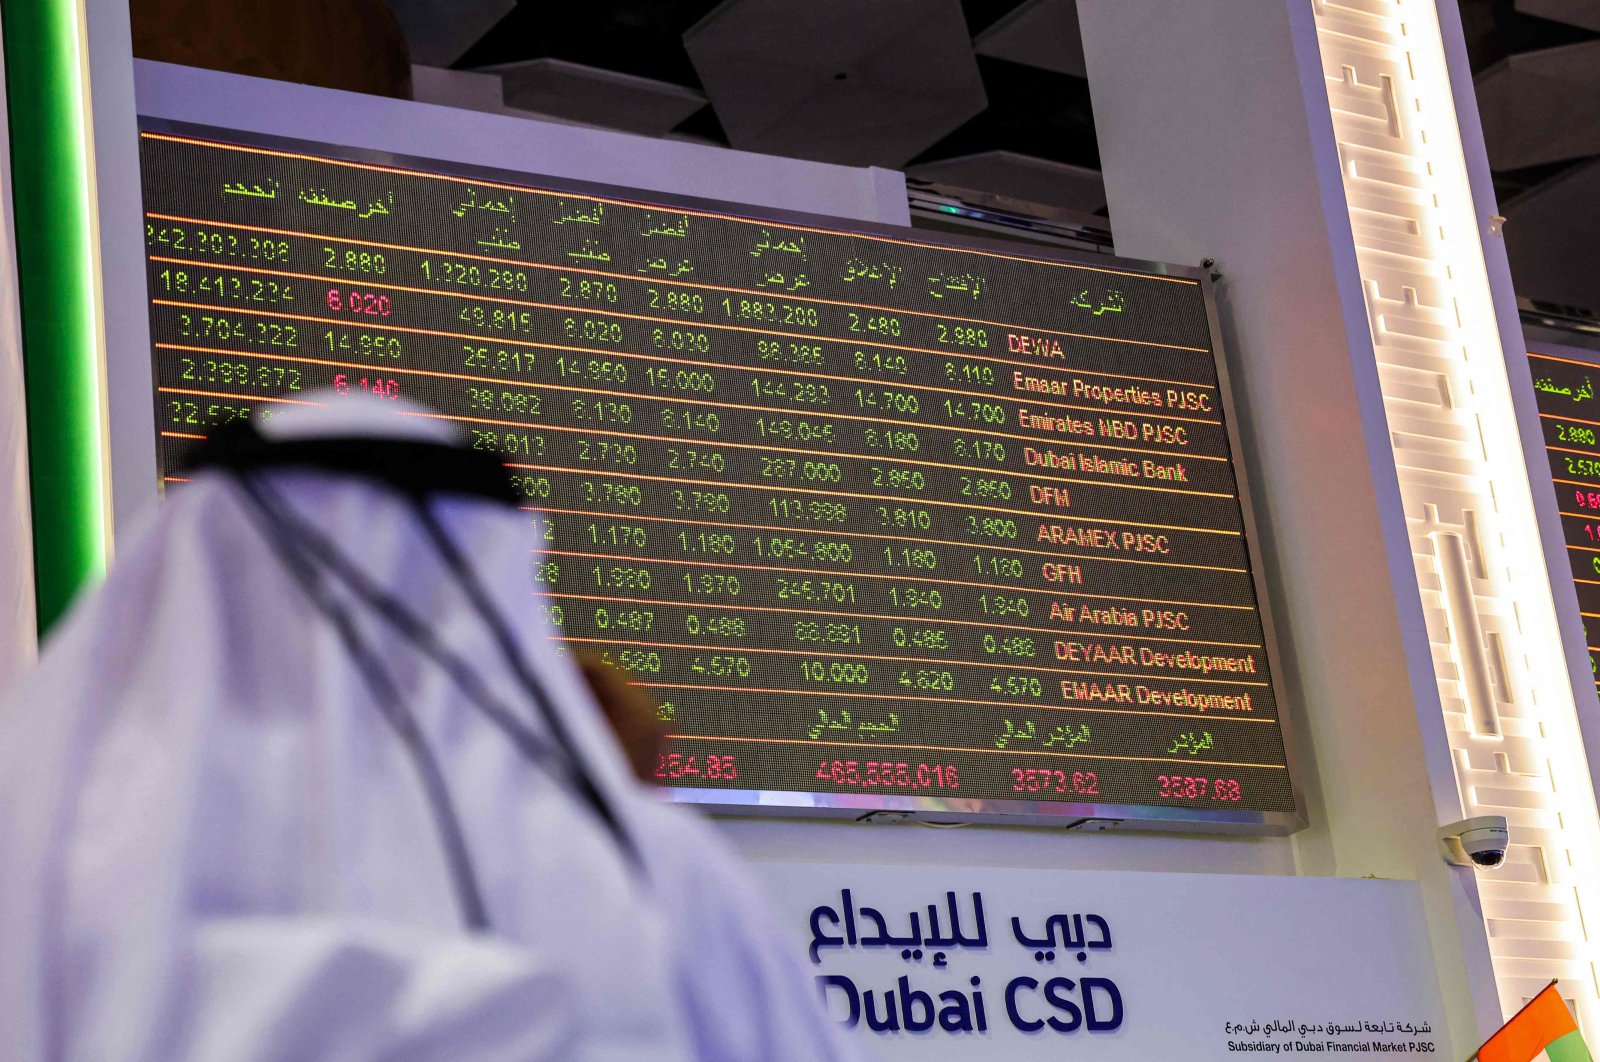 A man watches stock movements on a display at the Dubai Financial Market stock exchange in the Gulf emirate on April 12, 2022. Shares in the Dubai Electricity and Water Authority (DEWA) rose 16% on April 12 in the Gulf region&#039;s biggest initial public offering since Saudi oil giant Aramco in 2019. (AFP Photo)